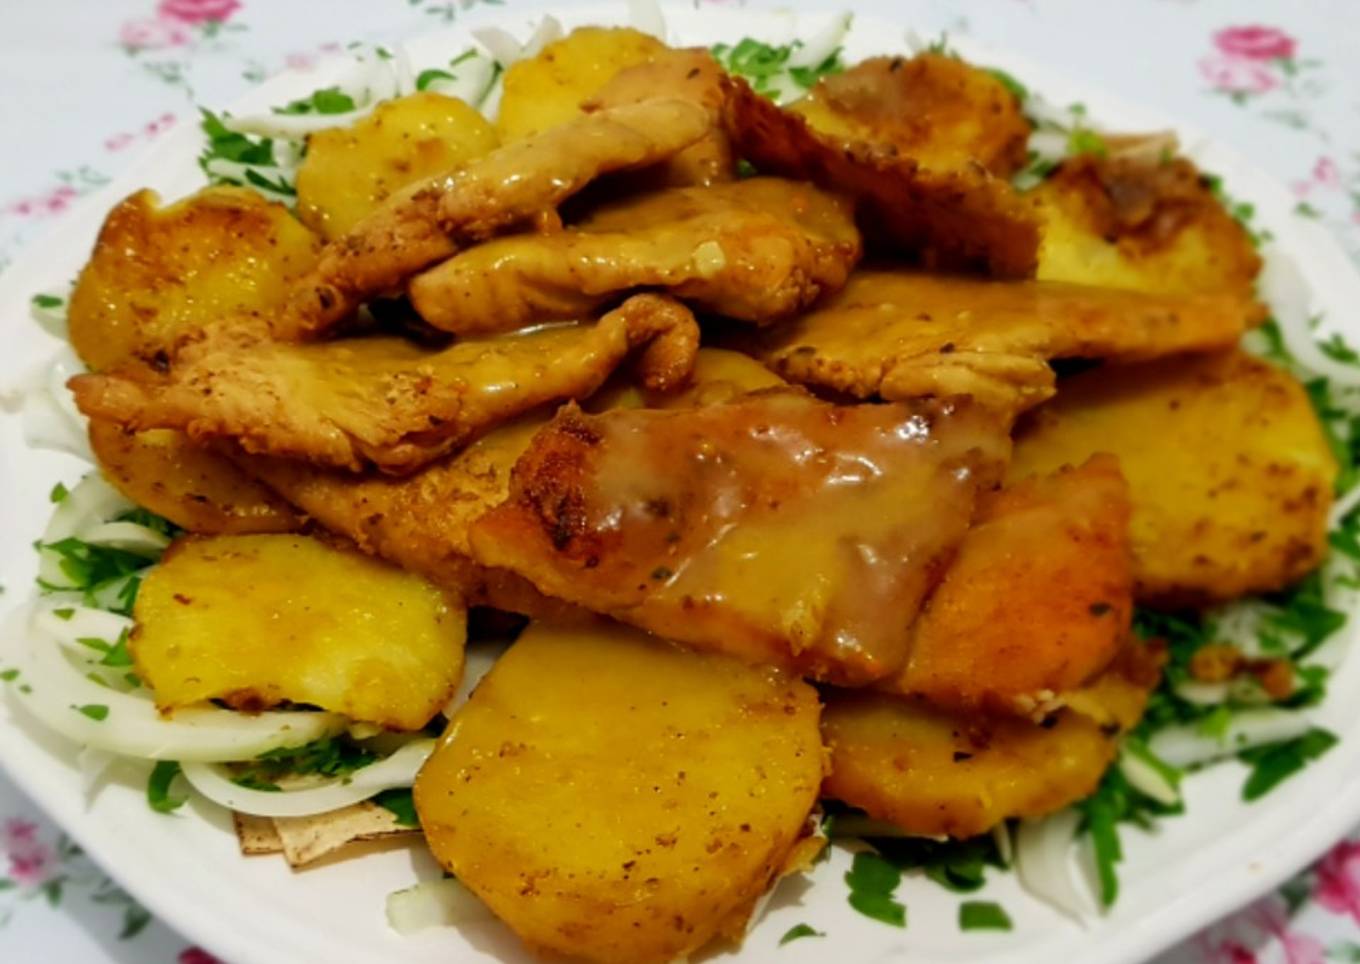 Smoked Chicken Breasts with Grilled Smoked Potatoes. #mycookbook